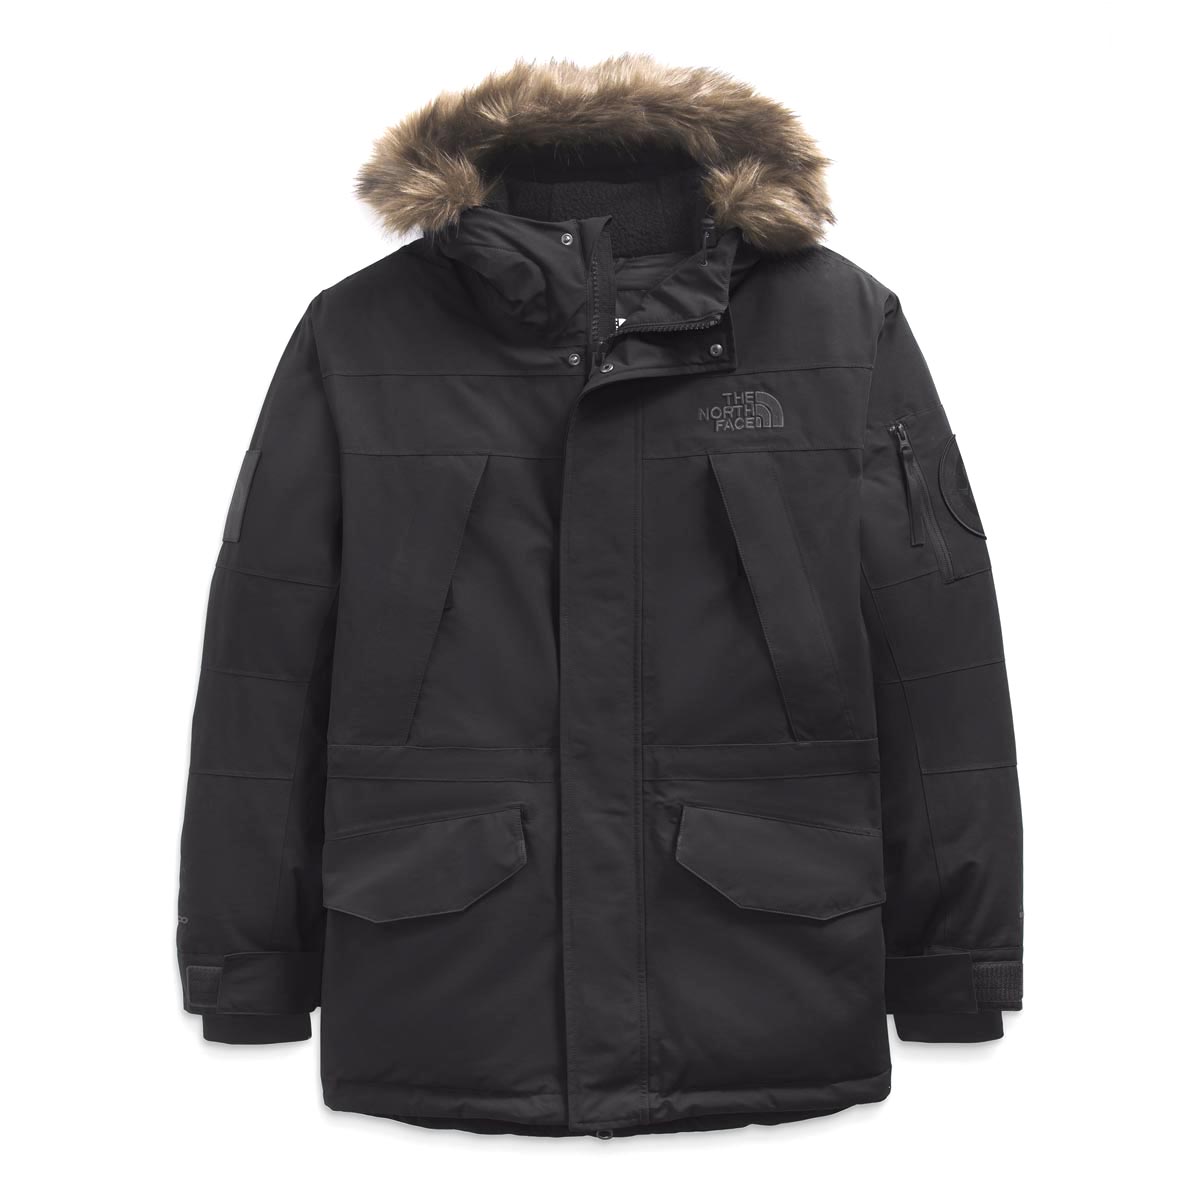 The North Face Men's Expedition McMurdo Parka